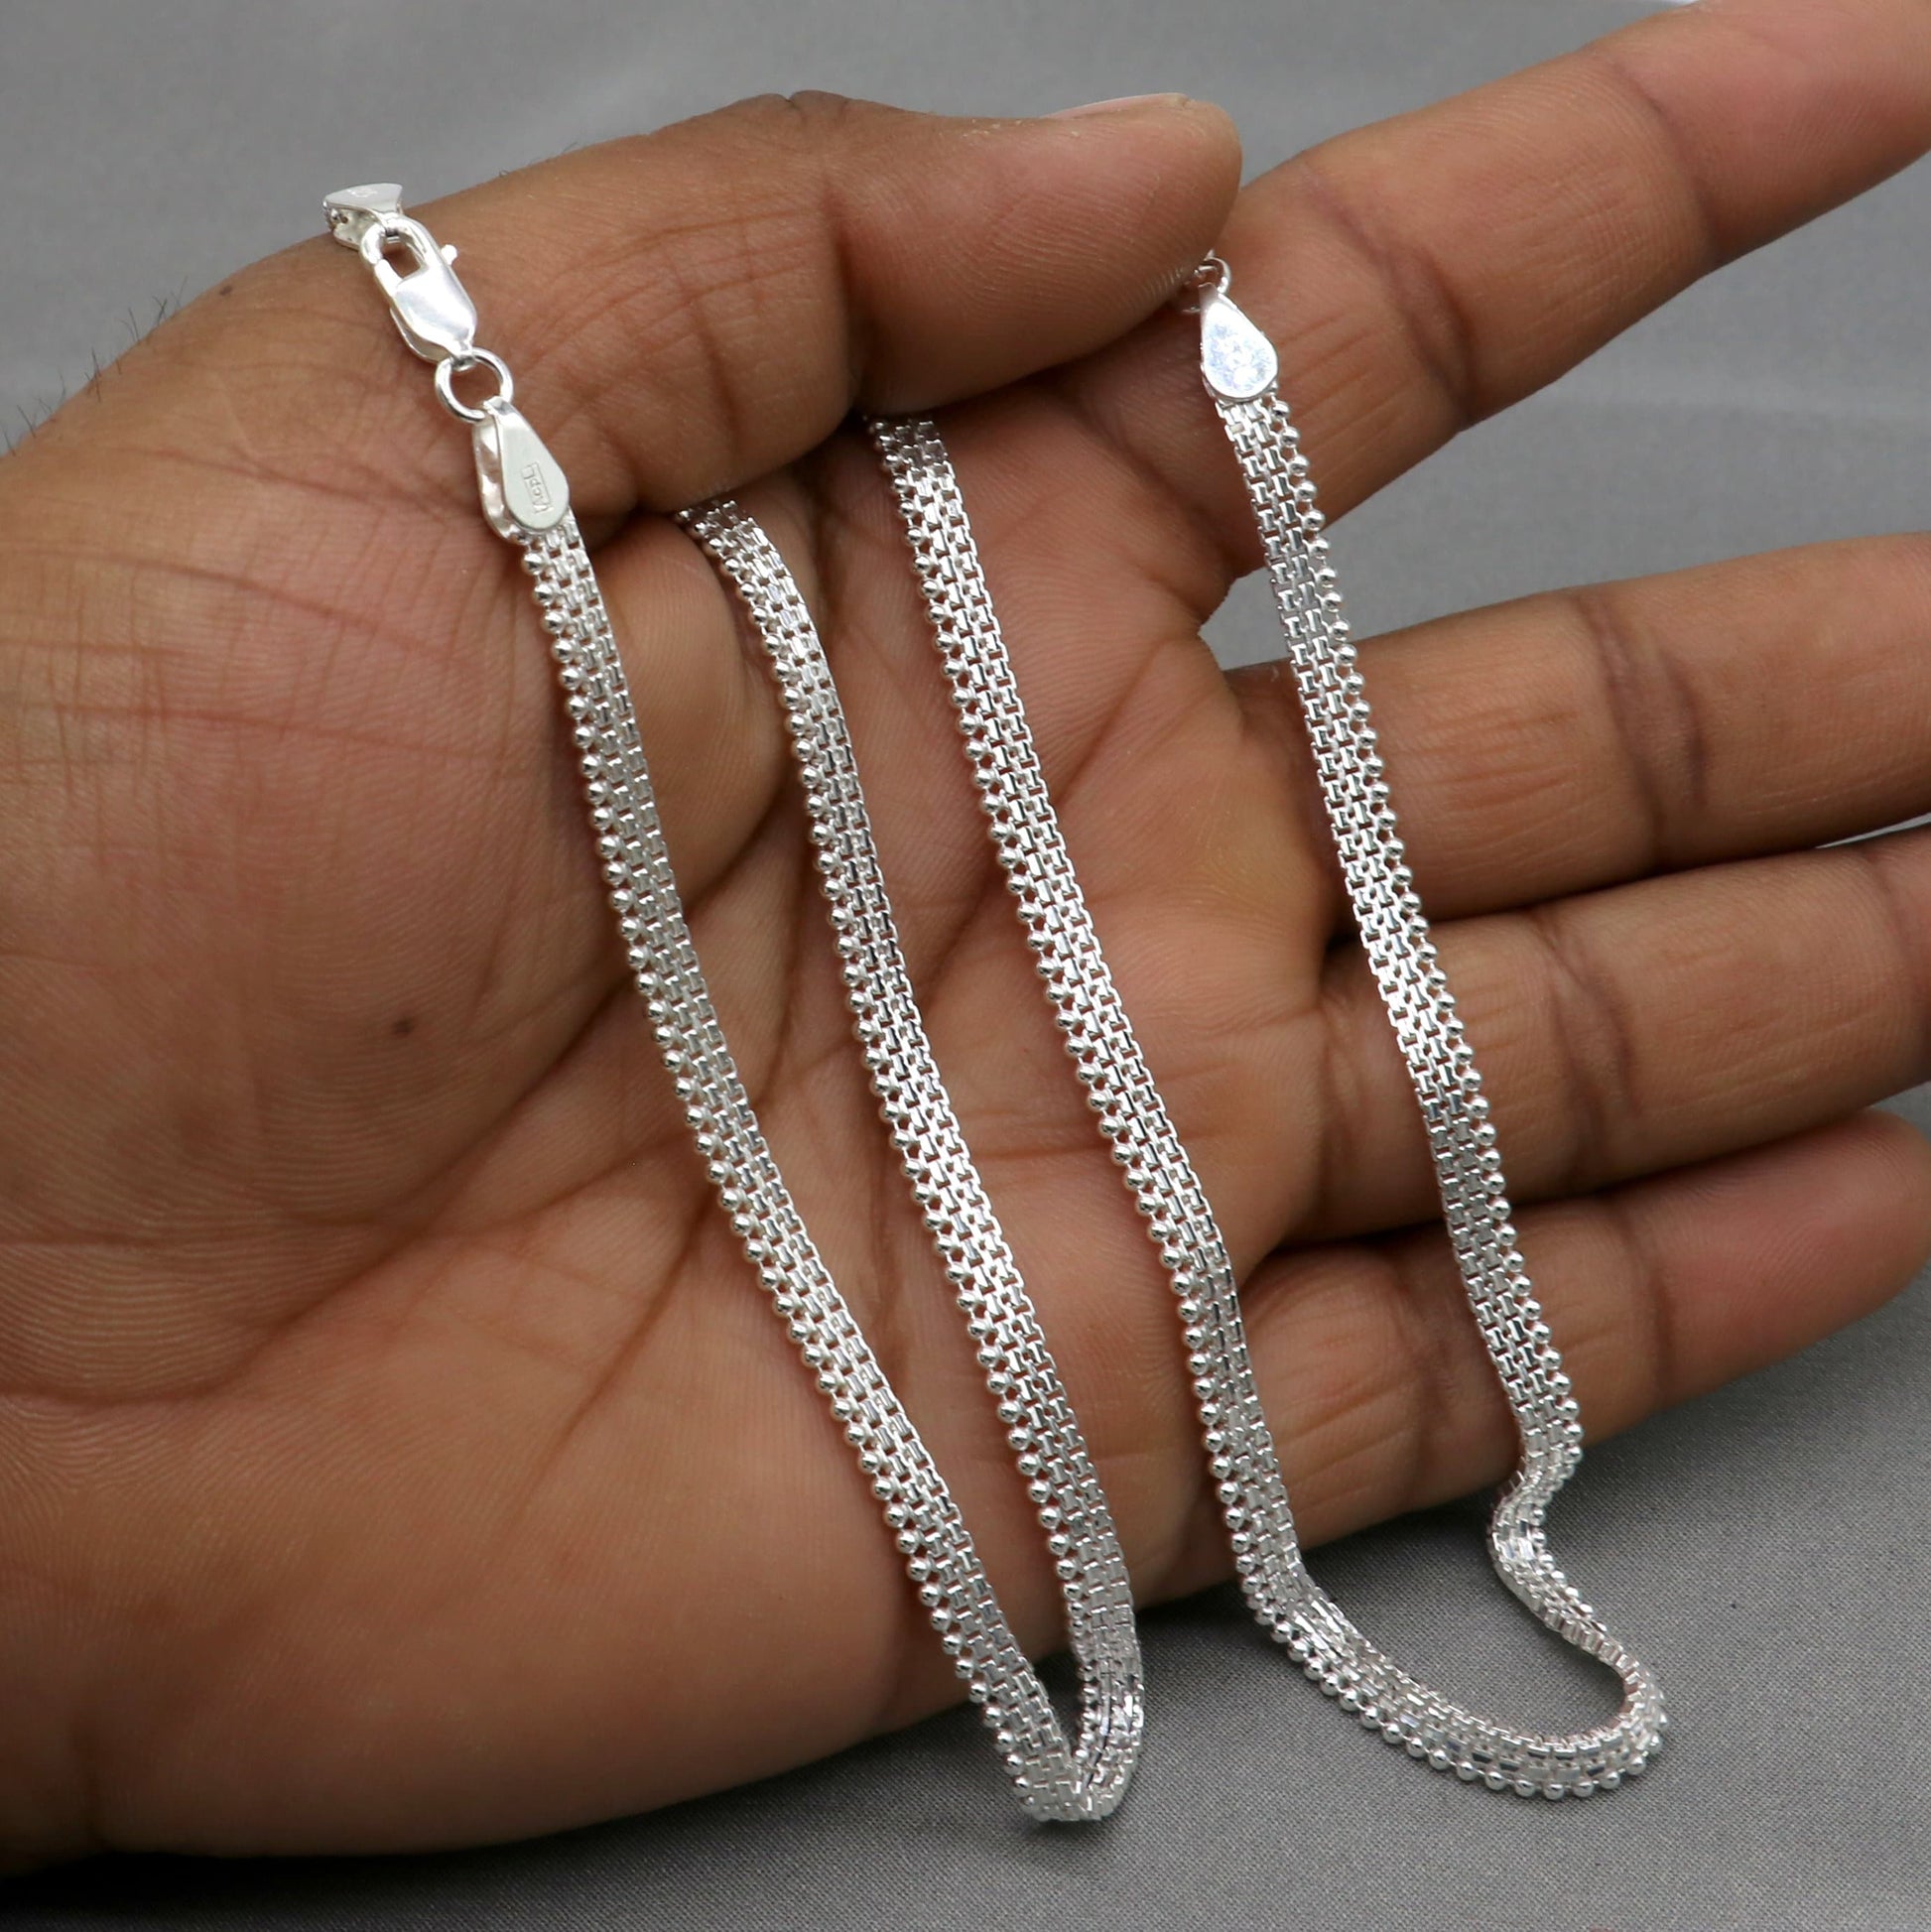 Handmade 4MM chain 925 sterling silver ankle bracelet, silver anklets, foot bracelet amazing belly dance jewelry gift her ank606 - TRIBAL ORNAMENTS